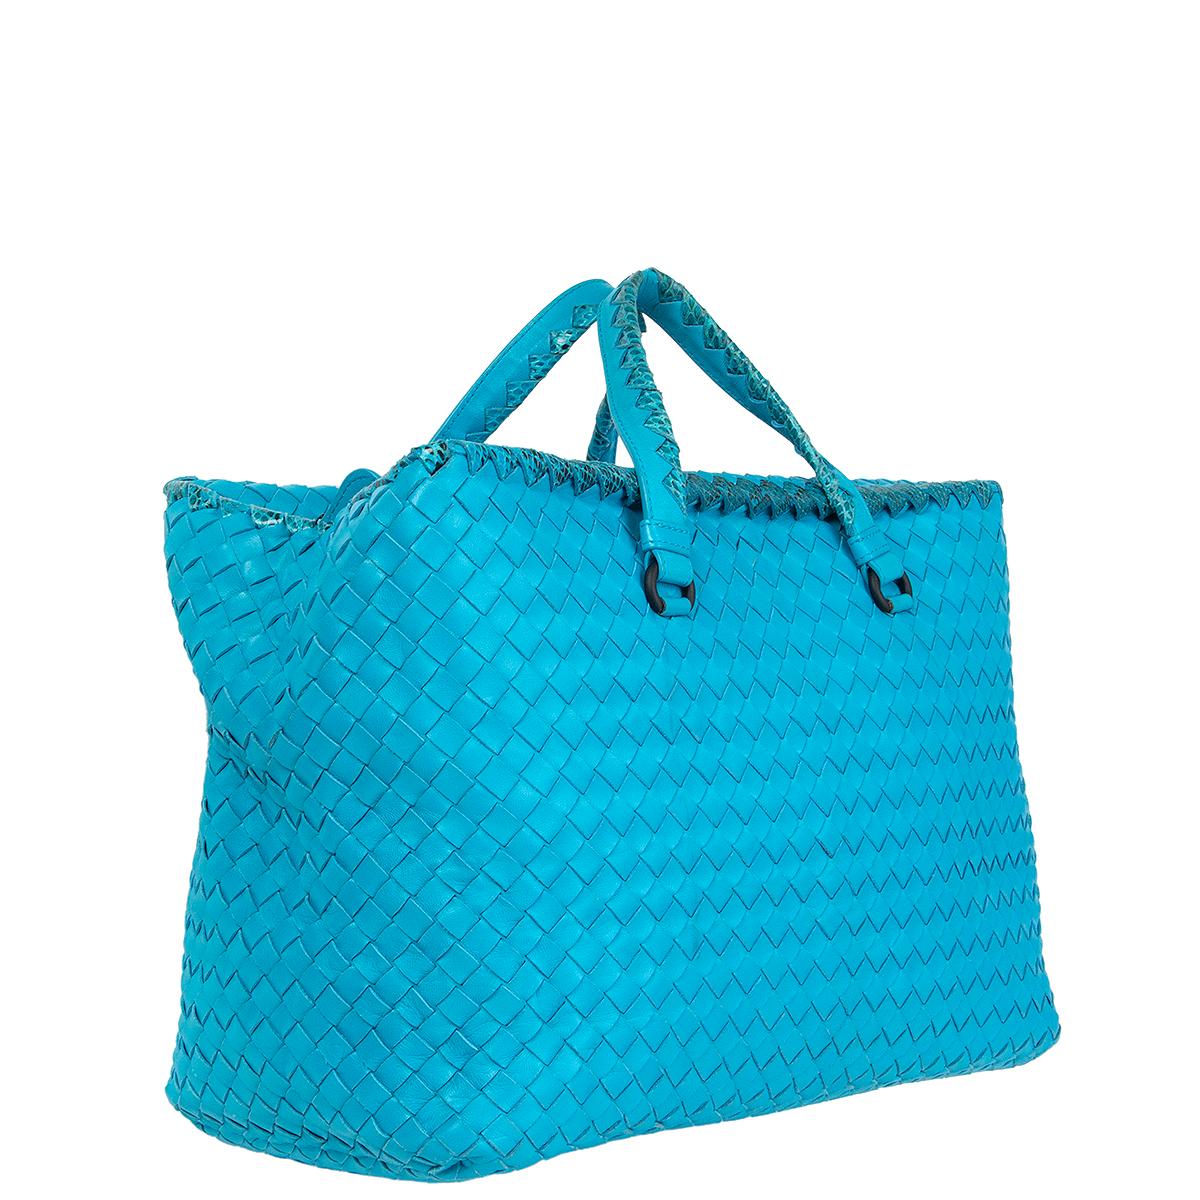 100% authentic Bottega Veneta tote handbag in turquoise Intrecciato nappa leather featuring karung snakeskin trimming and handles. Opens with zipper on the top and is lined in dark taupe suede with one zipper pocket against the back and one open